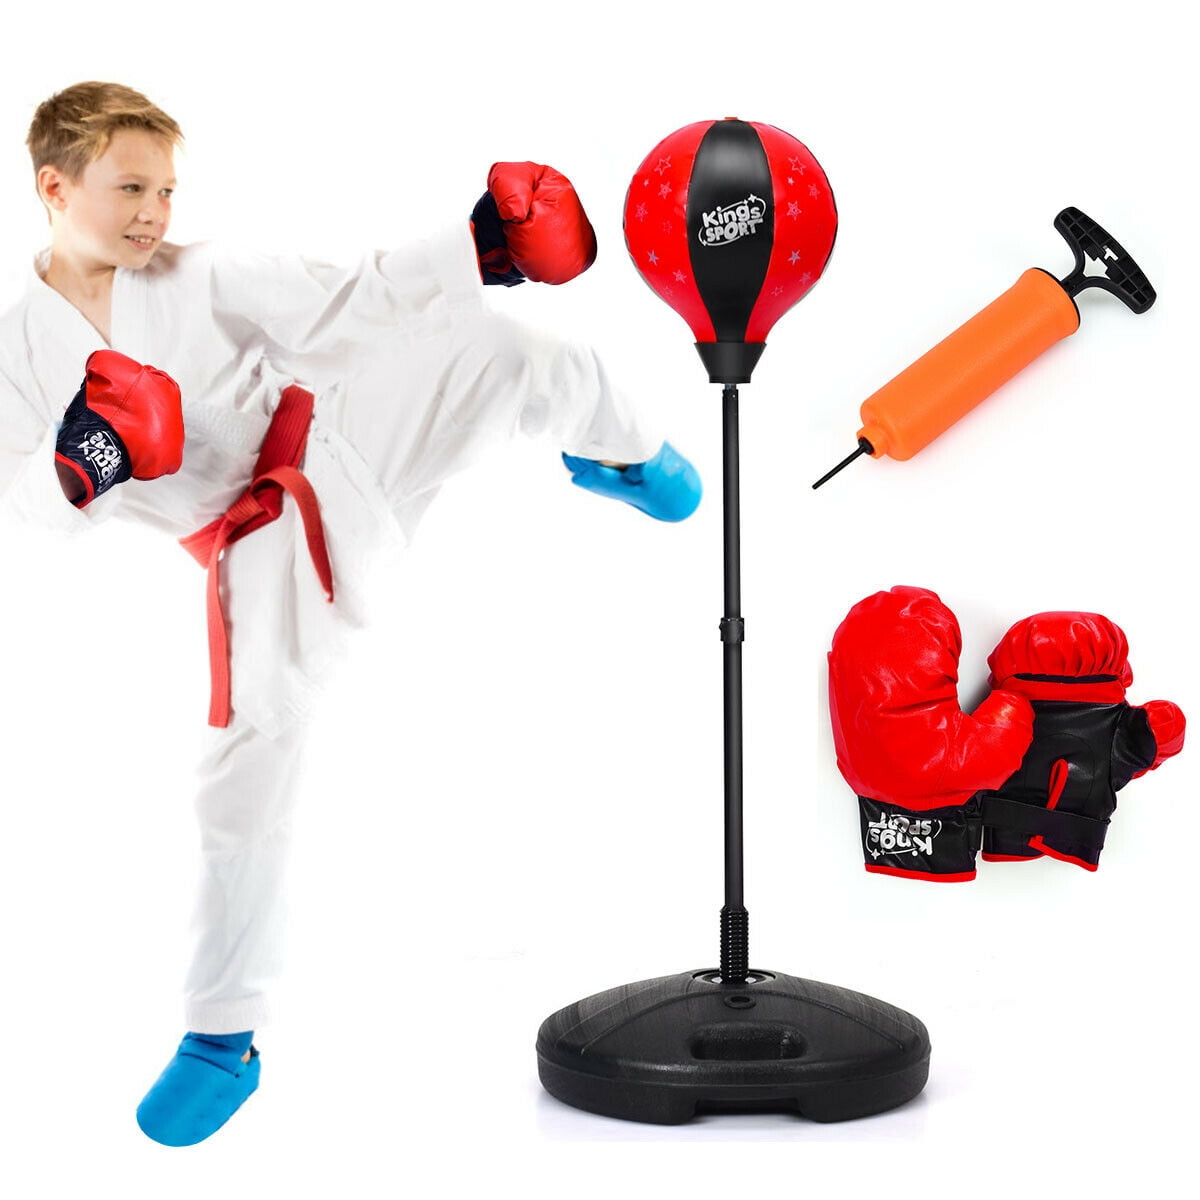 Ball Pump 70cm-105cm Kids and Teenagers Punching Bag 1 Pair of Boxing Gloves 